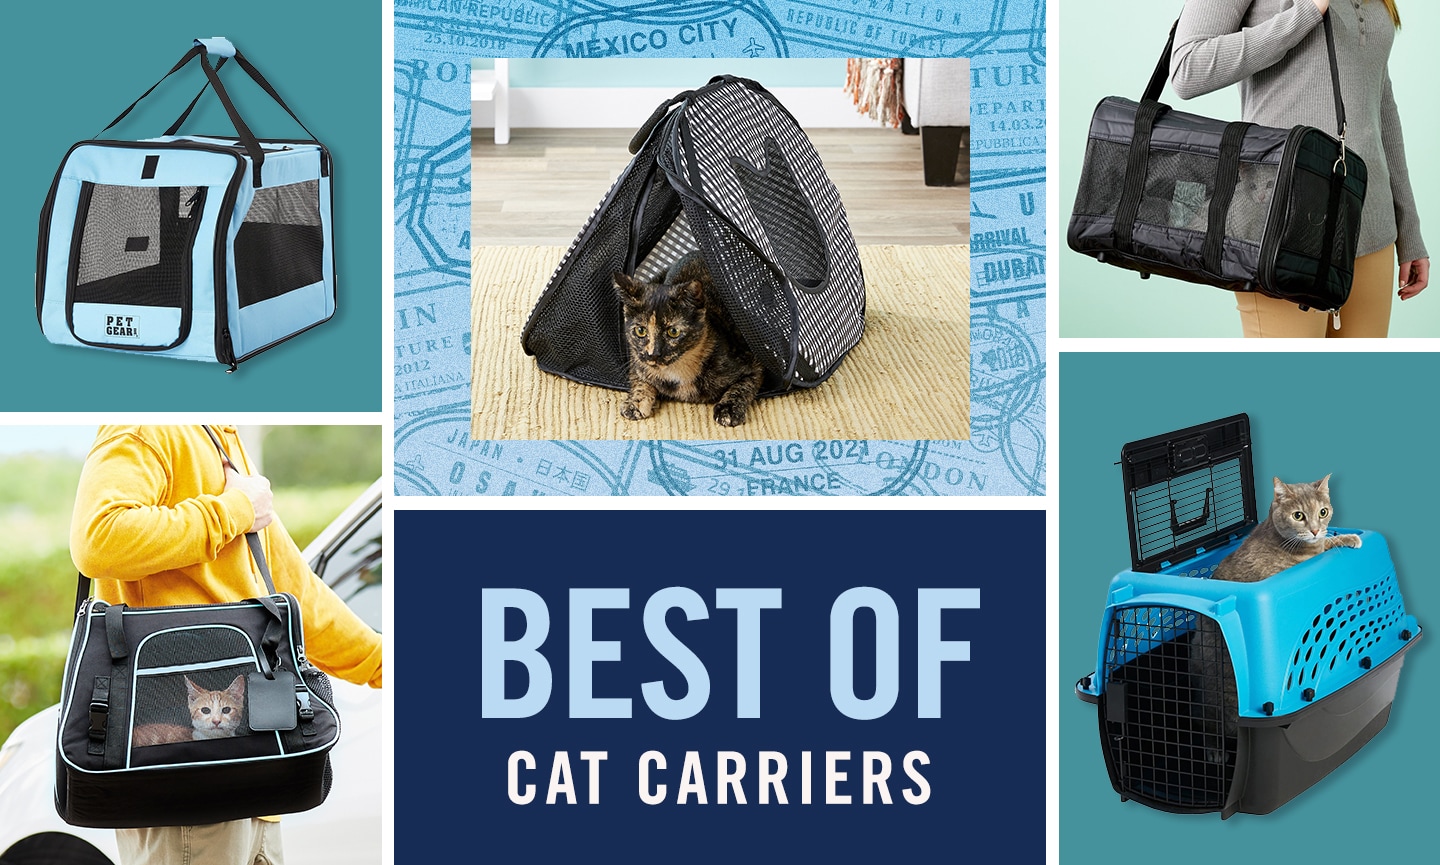 Cat-In-The-Bag – The Best Cat Carrier!